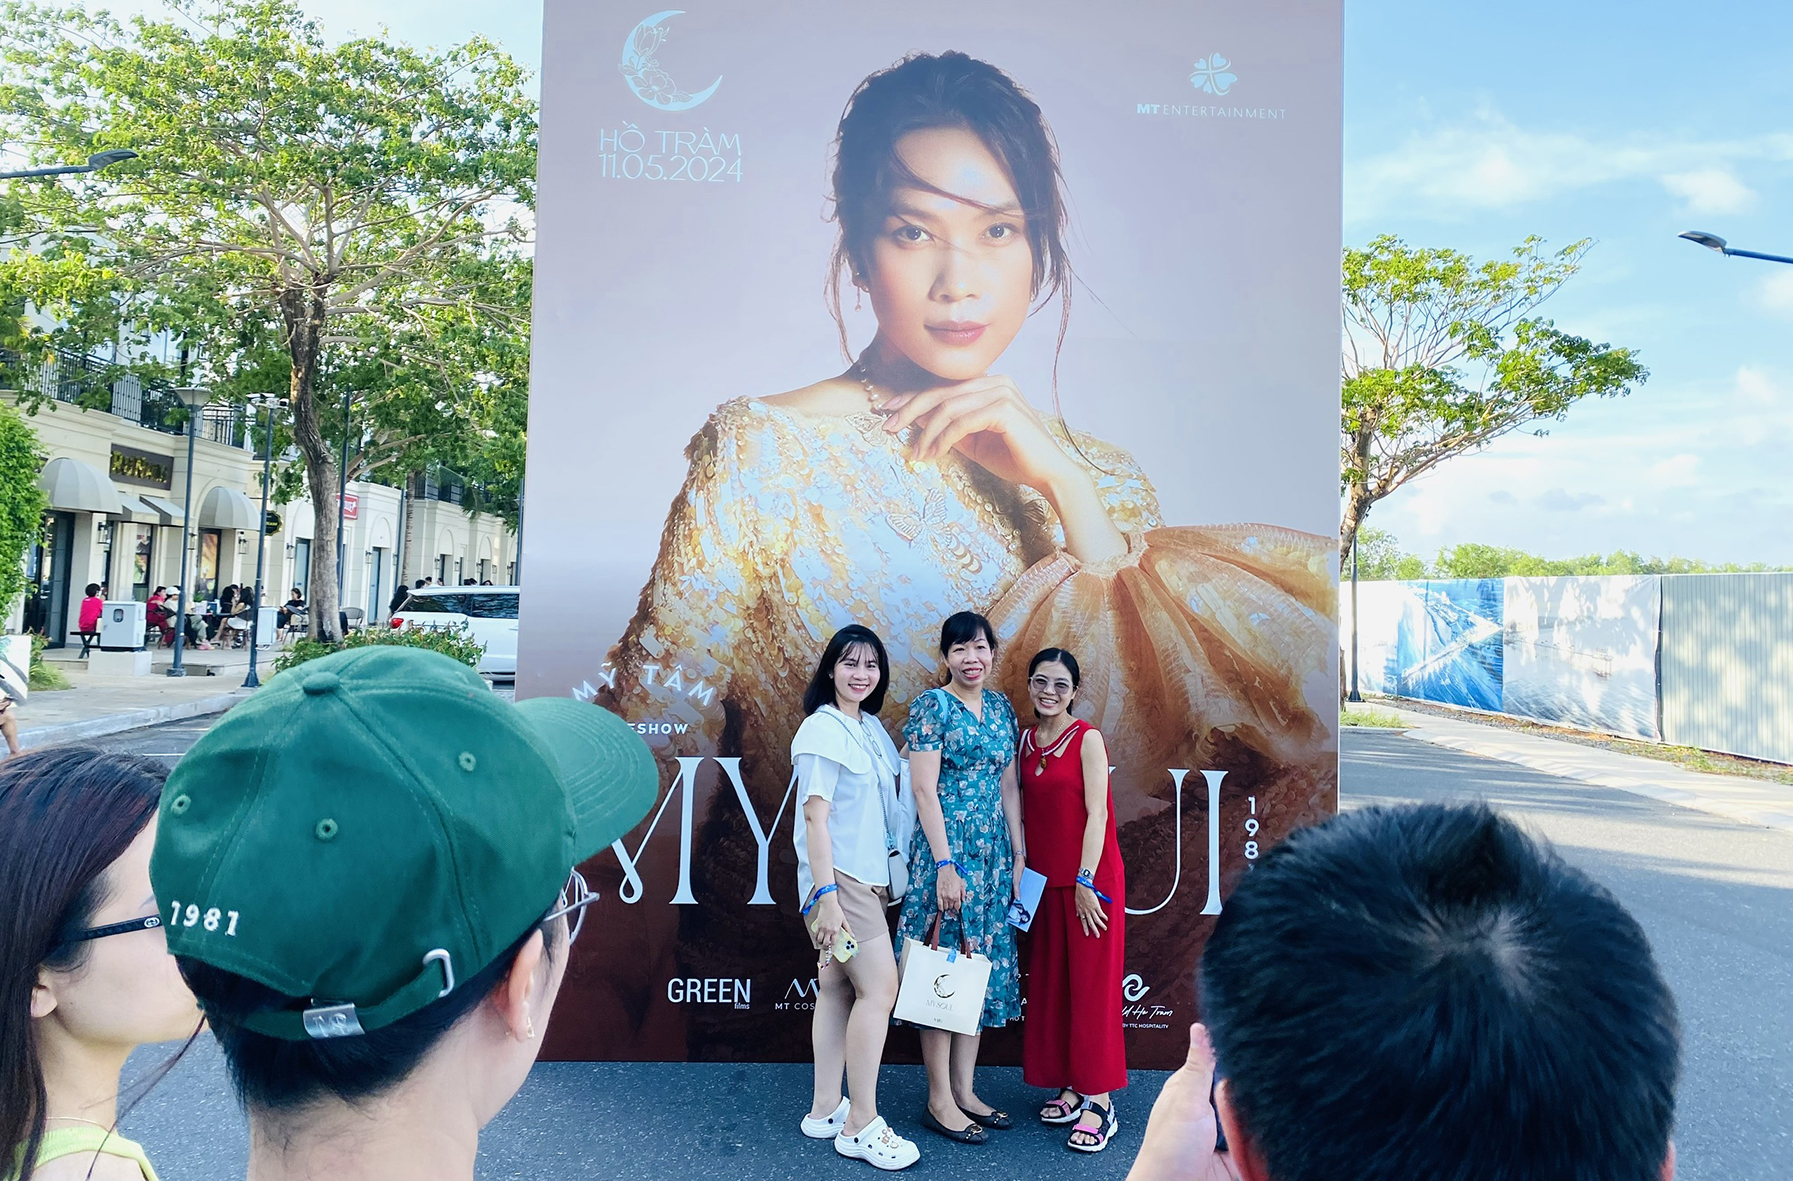 Fans arrived very early to take photos with the poster of singer My Tam.